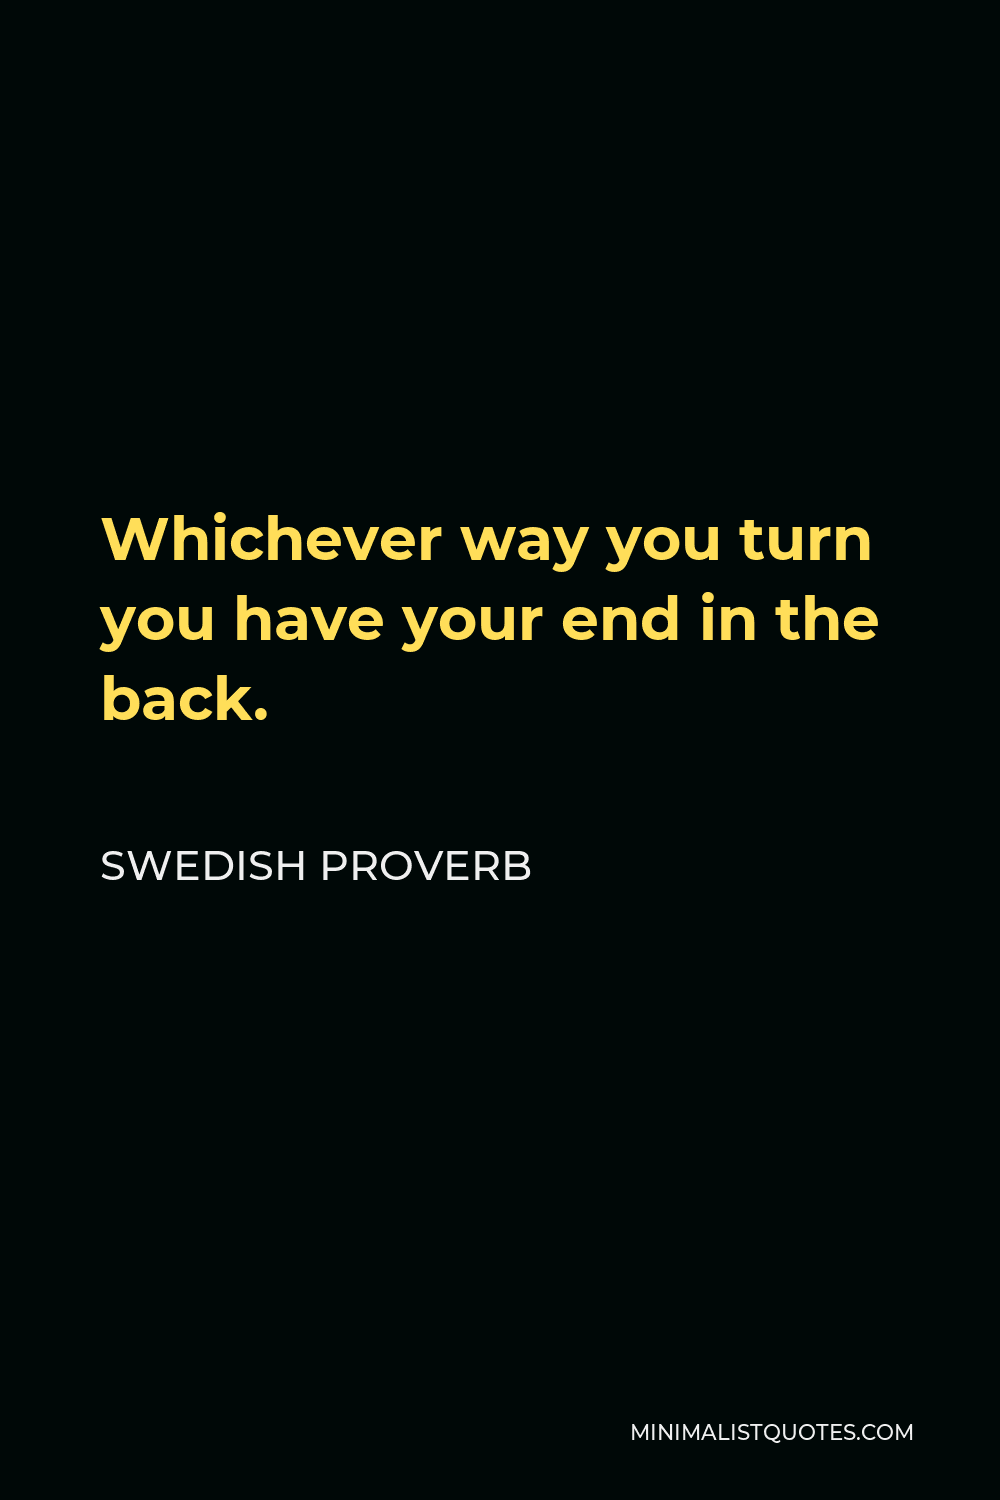 Swedish Proverb Quote - Whichever way you turn you have your end in the back.